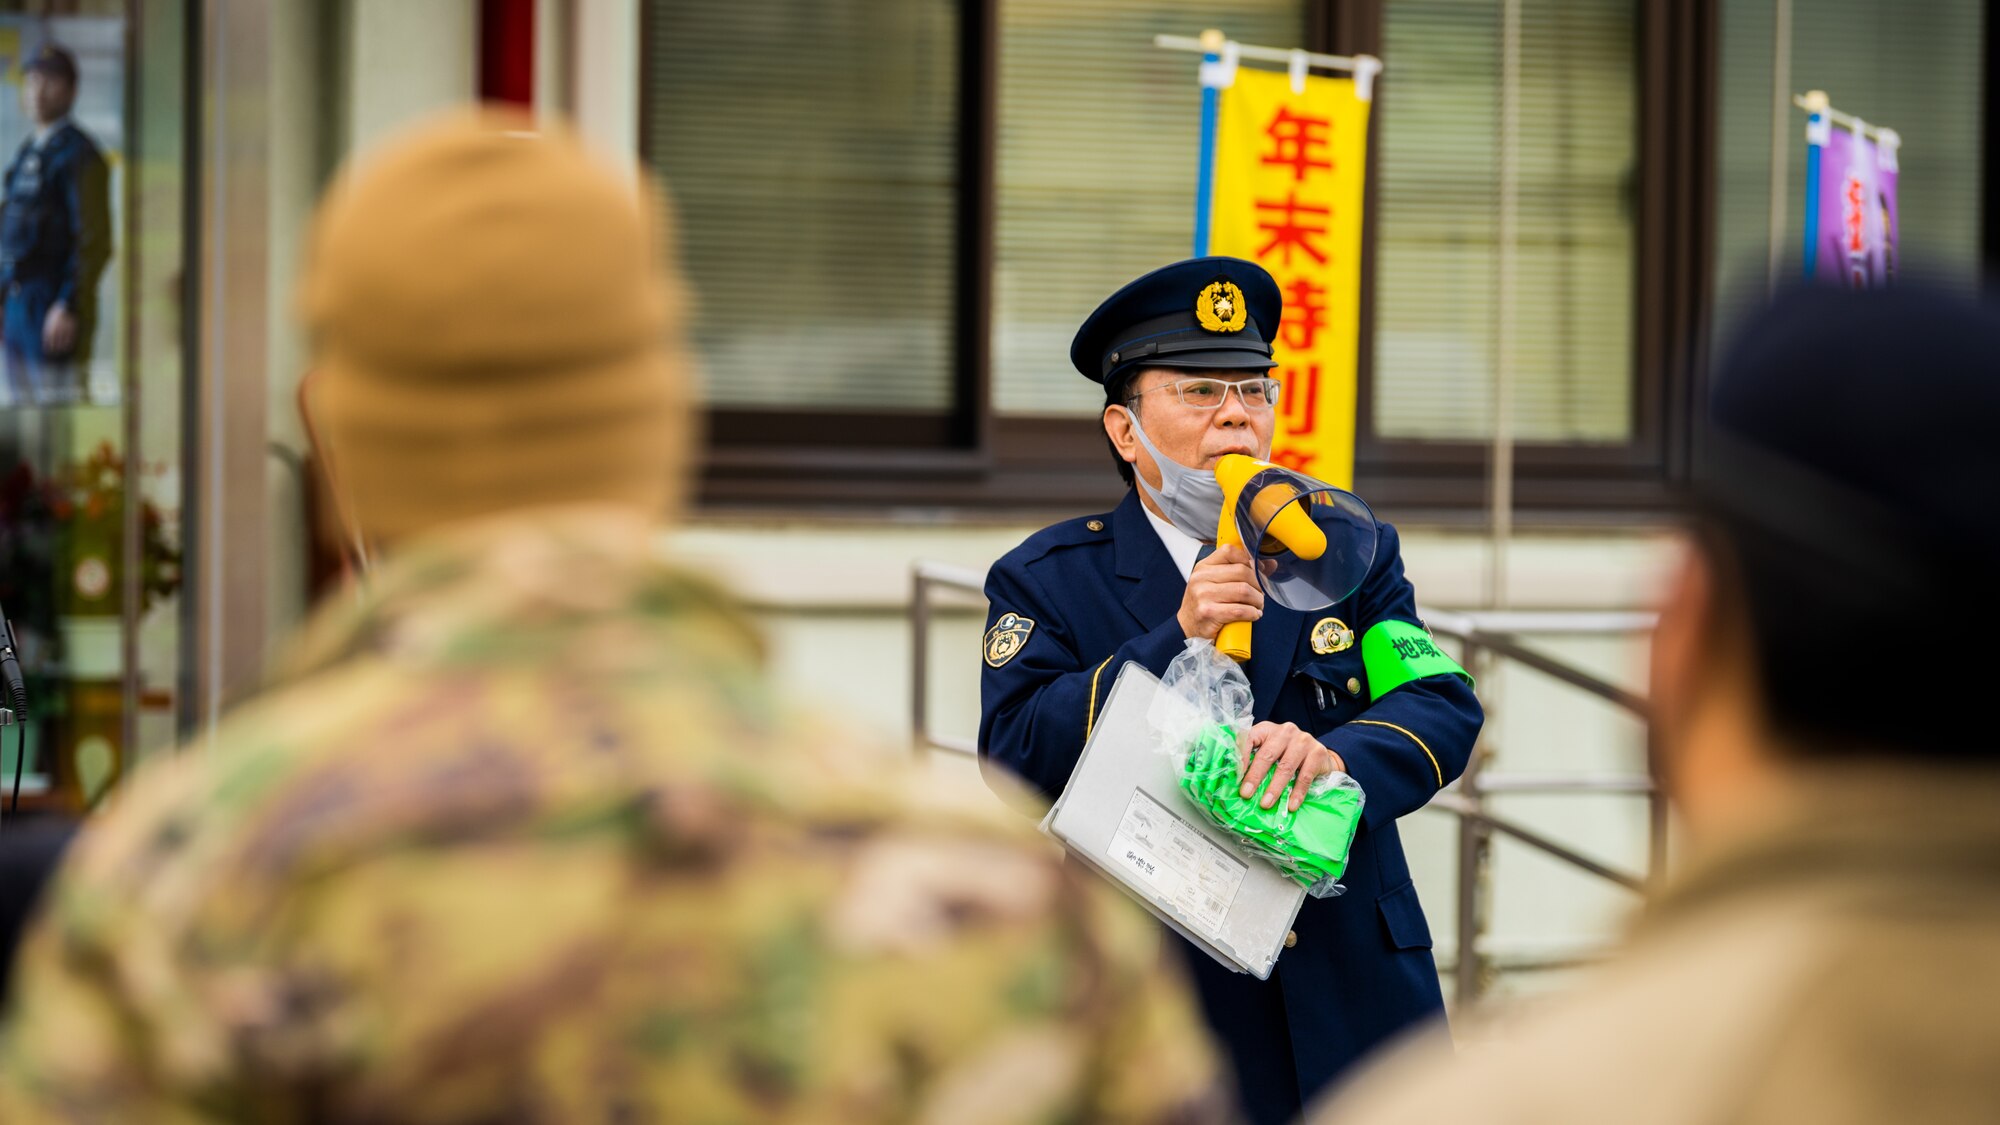 Service members, community members, and Misawa City police officers come together during the End-of-Year Traffic Safety and Crime Prevention Campaign in Misawa City, Japan, Dec. 16, 2021. During the campaign, 35th Fighter Wing, Misawa City and police leadership distributed flyers with information on what to do if anyone in the community finds themselves in an unsafe environment. (U.S. Air Force photo by Staff Sgt. Jao’Torey Johnson)